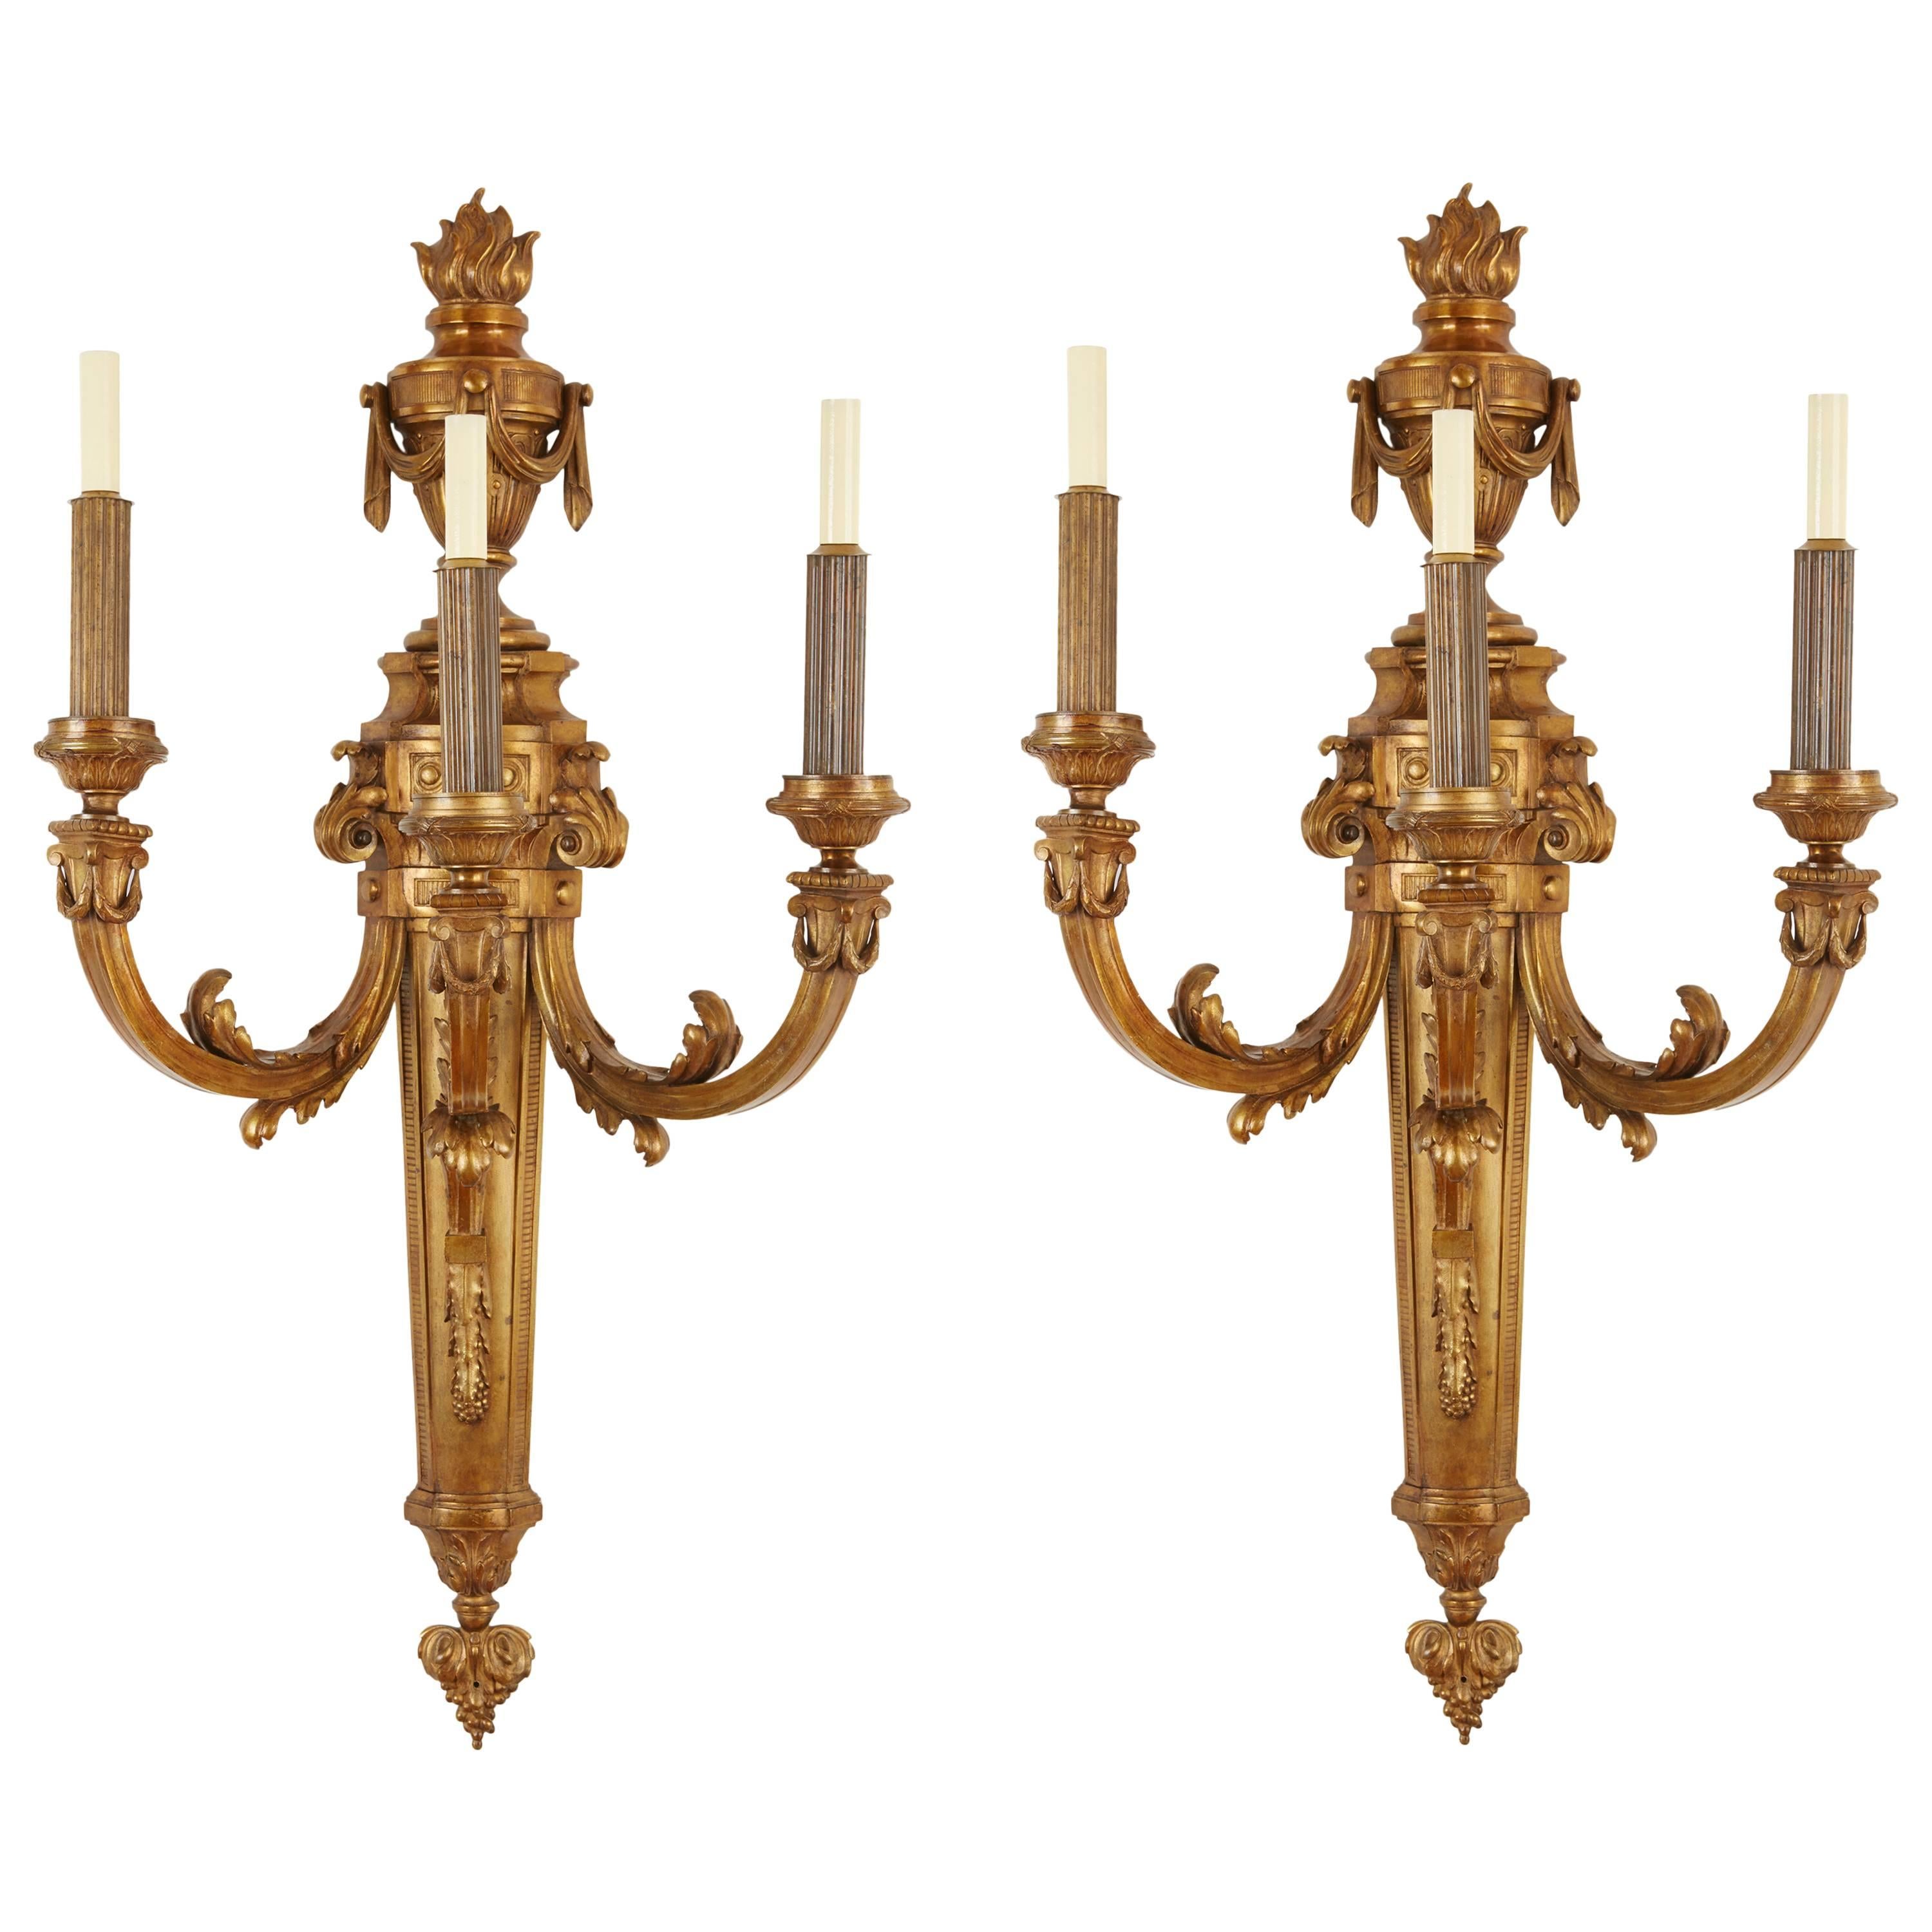 Extremely Large Pair of Louis XVI Style Three-Branch Ormolu Wall Lights